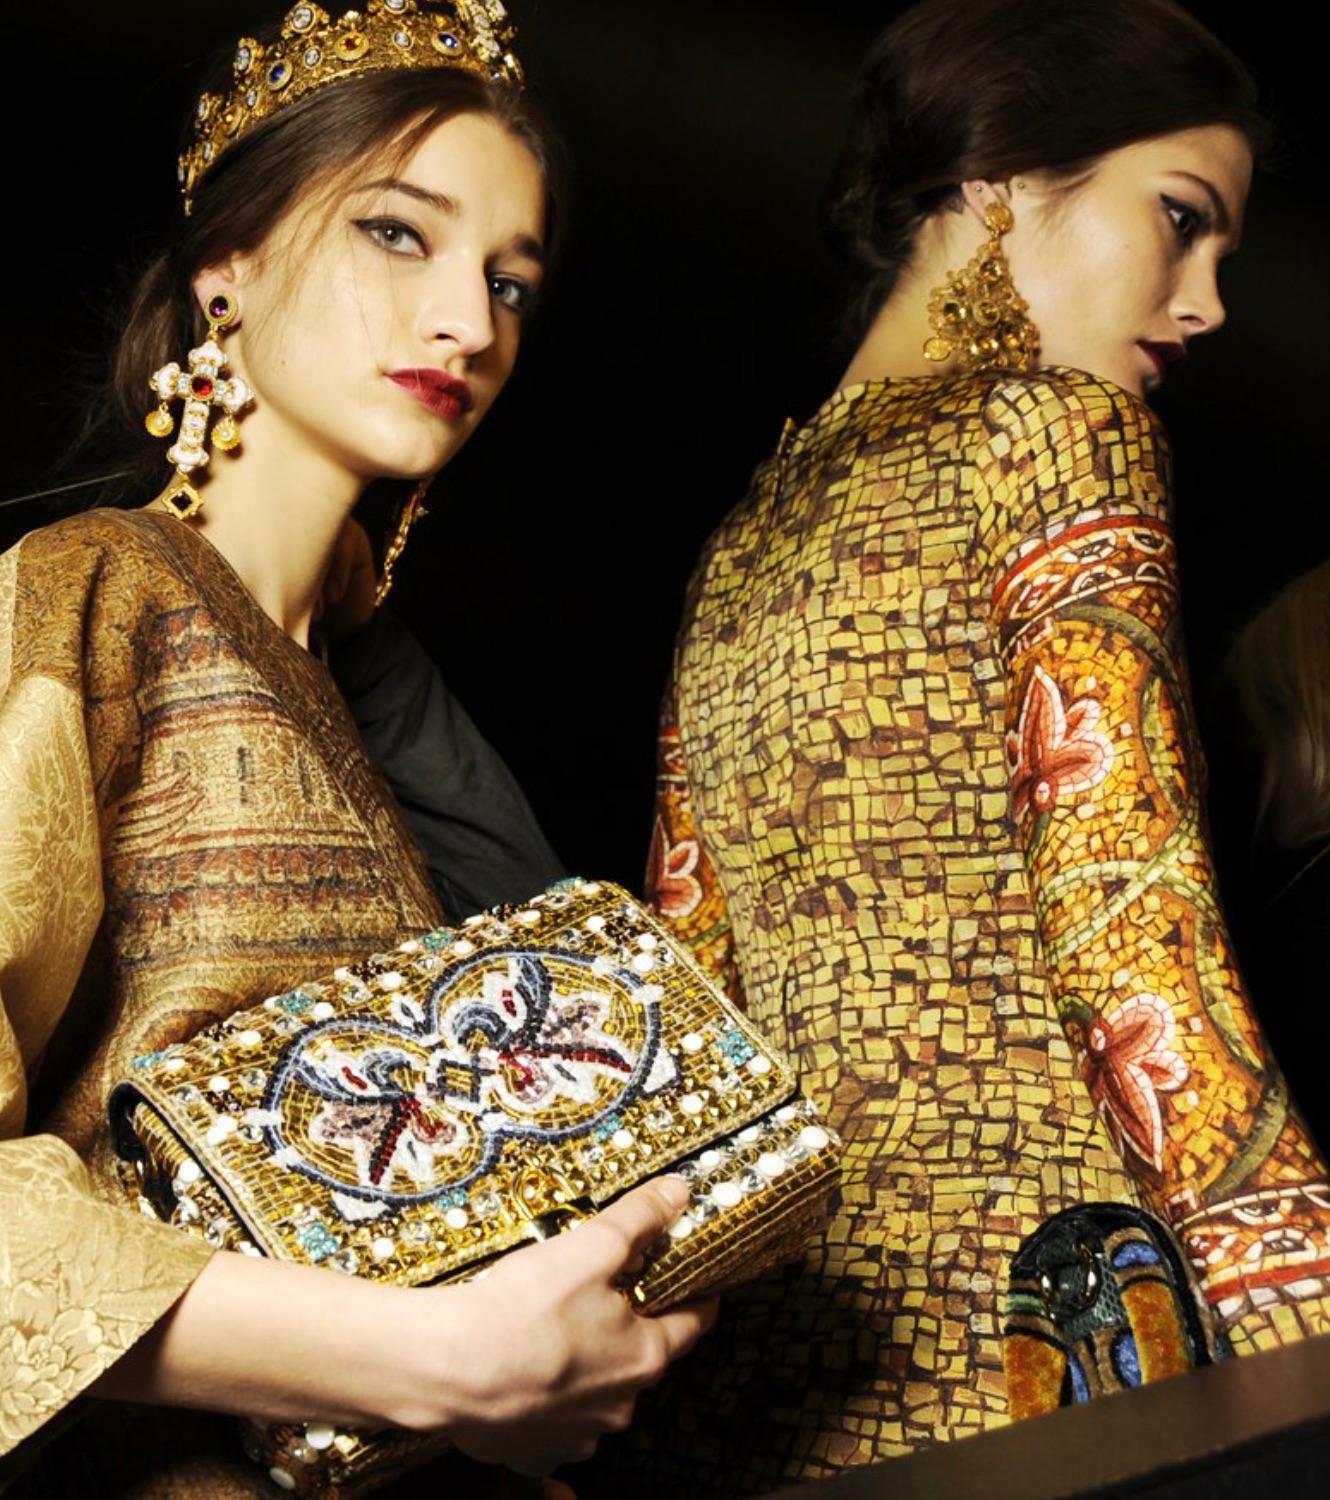 The Dolce&Gabbana Fall/Winter 2013 Byzantine mosaic shoulder bag is a stunning piece from the iconic collection inspired by the mesmerizing mosaics of the Monreale Cathedral in Sicily. This exquisite bag features a genuine python leather handle and